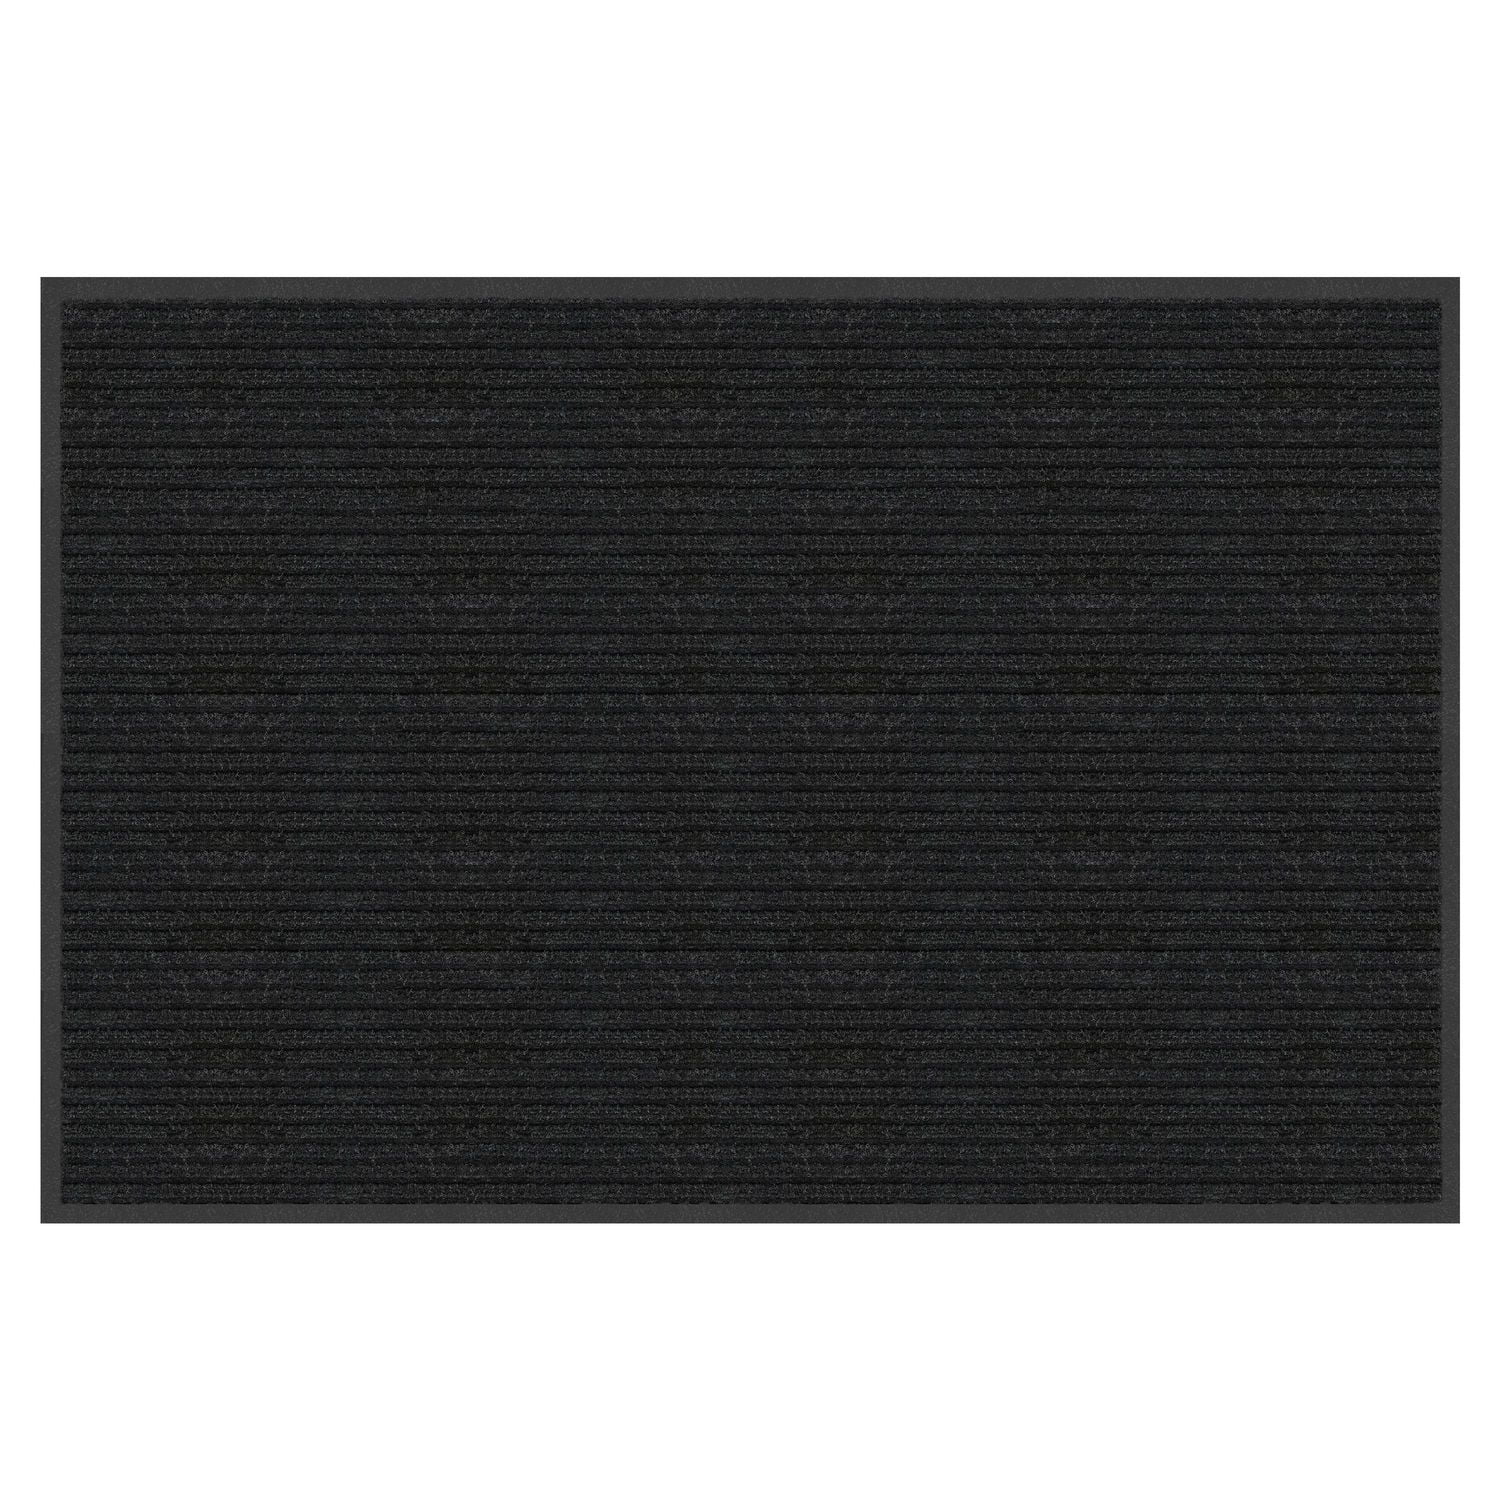 4 ft x 6 ft Wicklow Charcoal Mat, Mainstays 4 ft x 6 ft Wicklow Charcoal Mat  